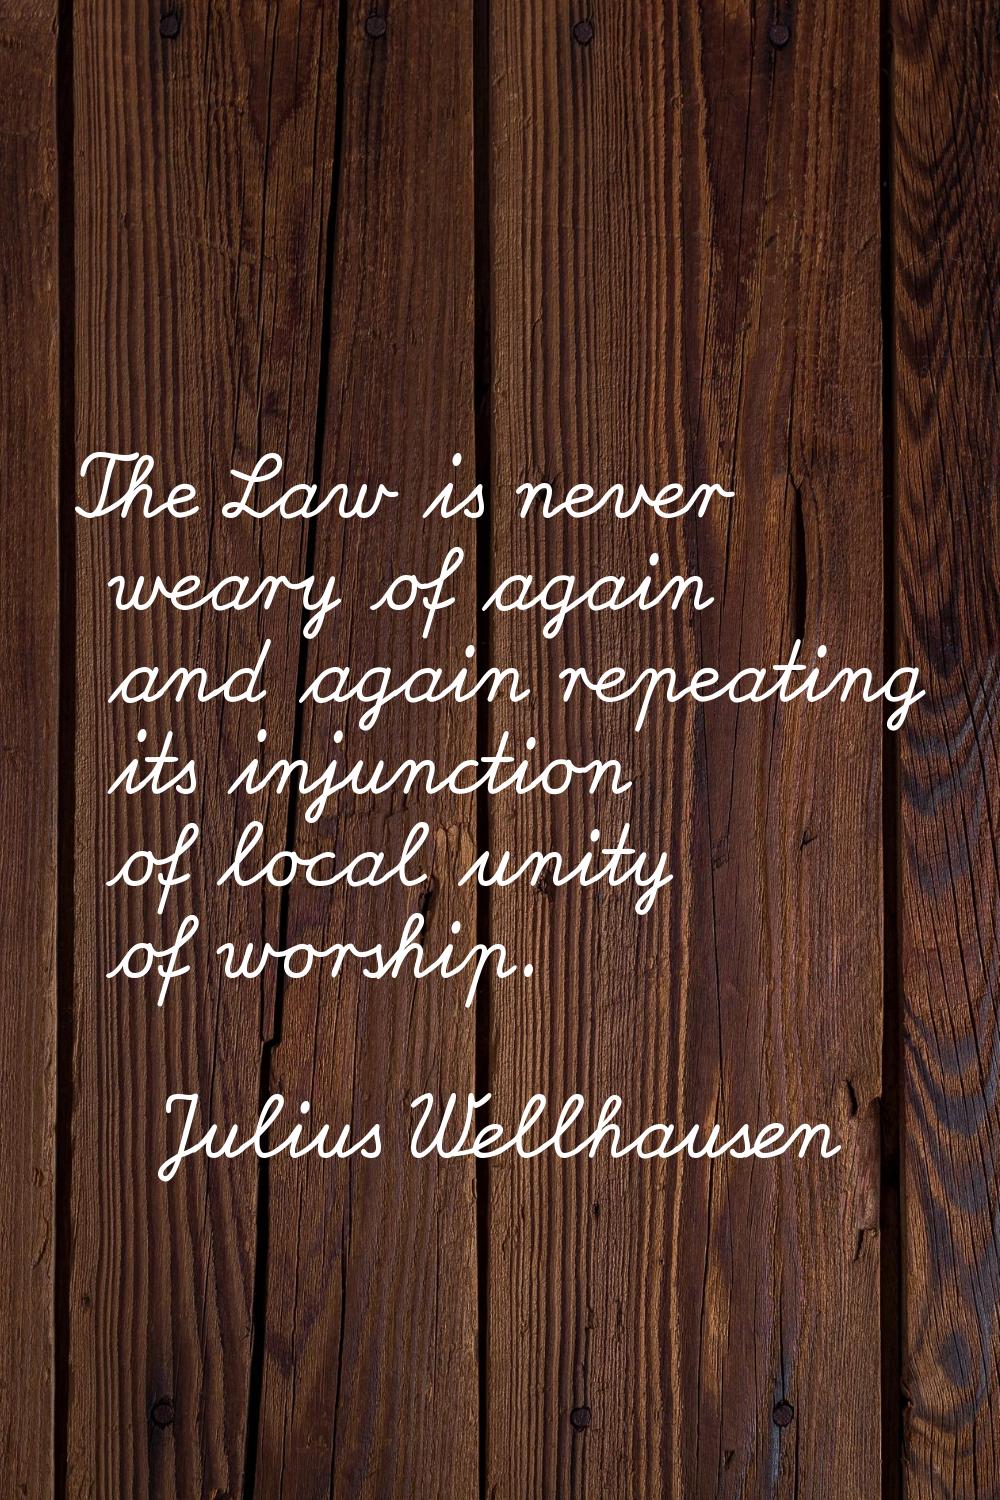 The Law is never weary of again and again repeating its injunction of local unity of worship.